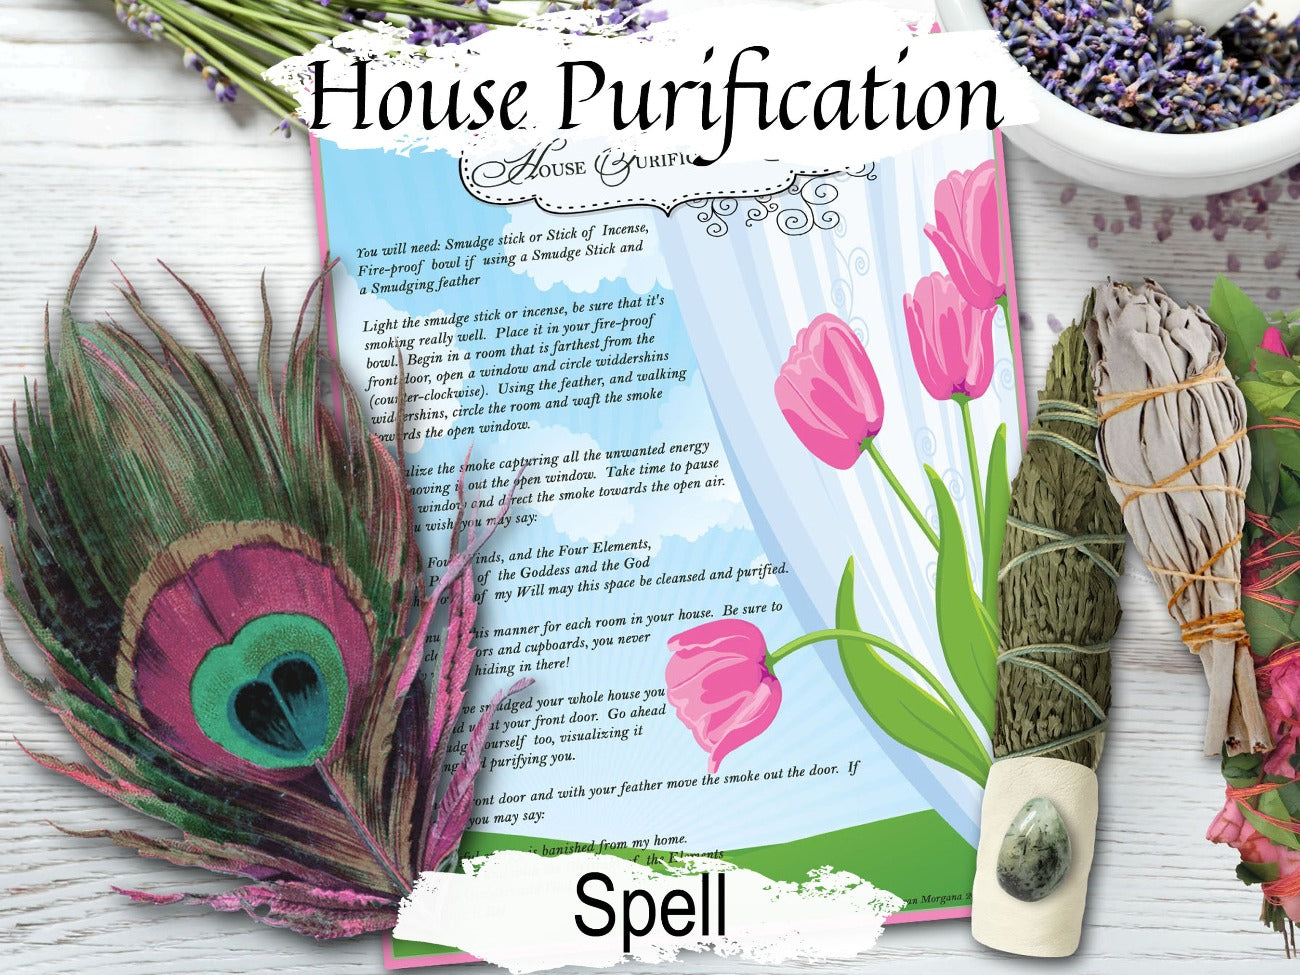 HOUSE PURIFICATION SPELL, Bless your Home, House Cleansing Spell, House Smudging Ritual, House Blessing, Wicca Witchcraft Housewarming Gift - Morgana Magick Spell